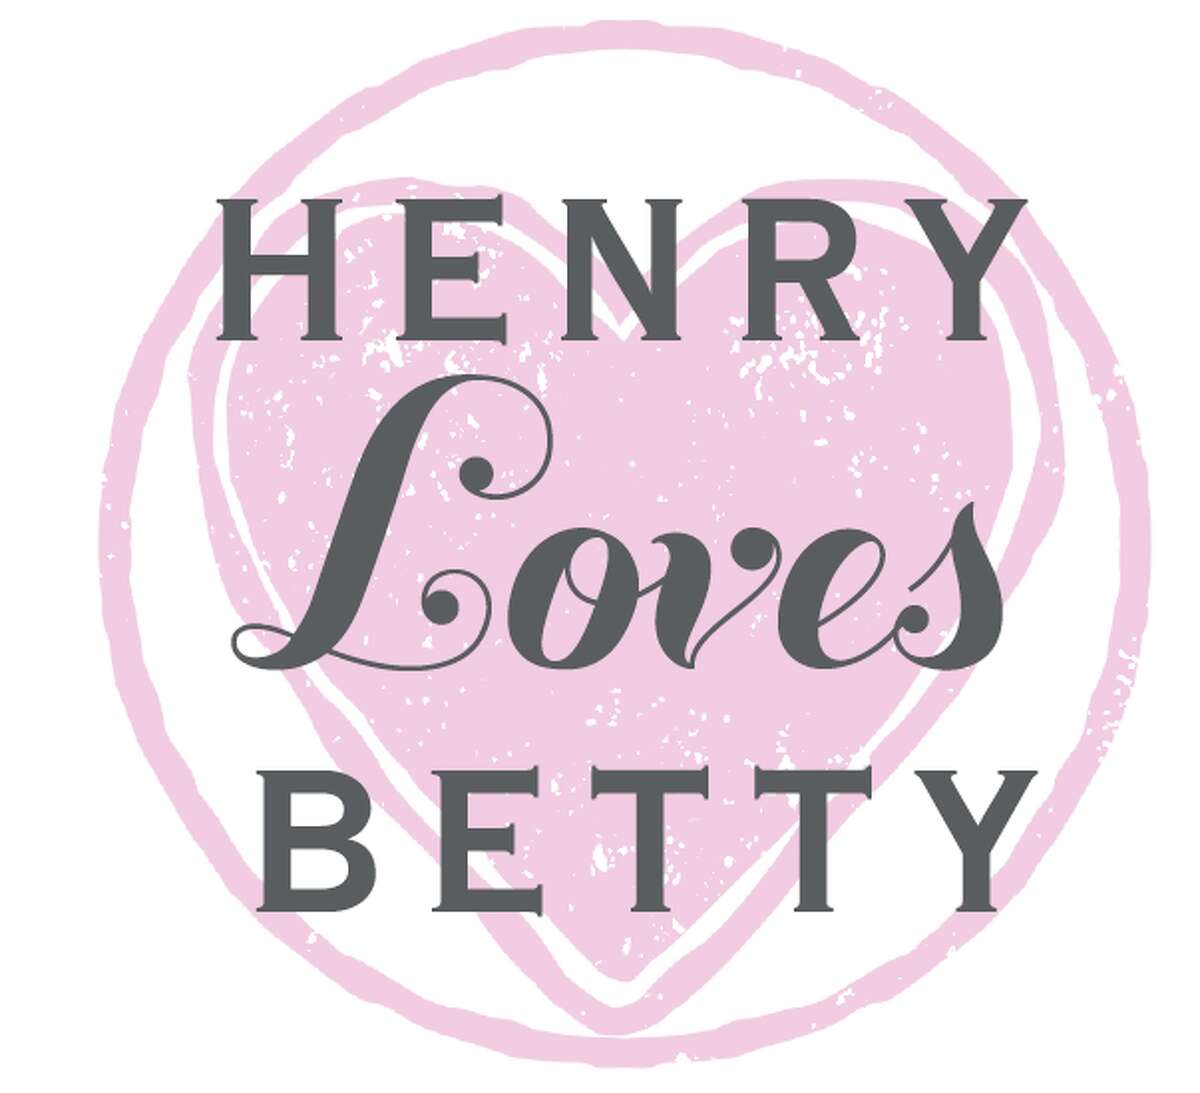 The Troy-based pet boutique Henry Loves Betty is opening a location in Albany. (henrylovesbetty.com)